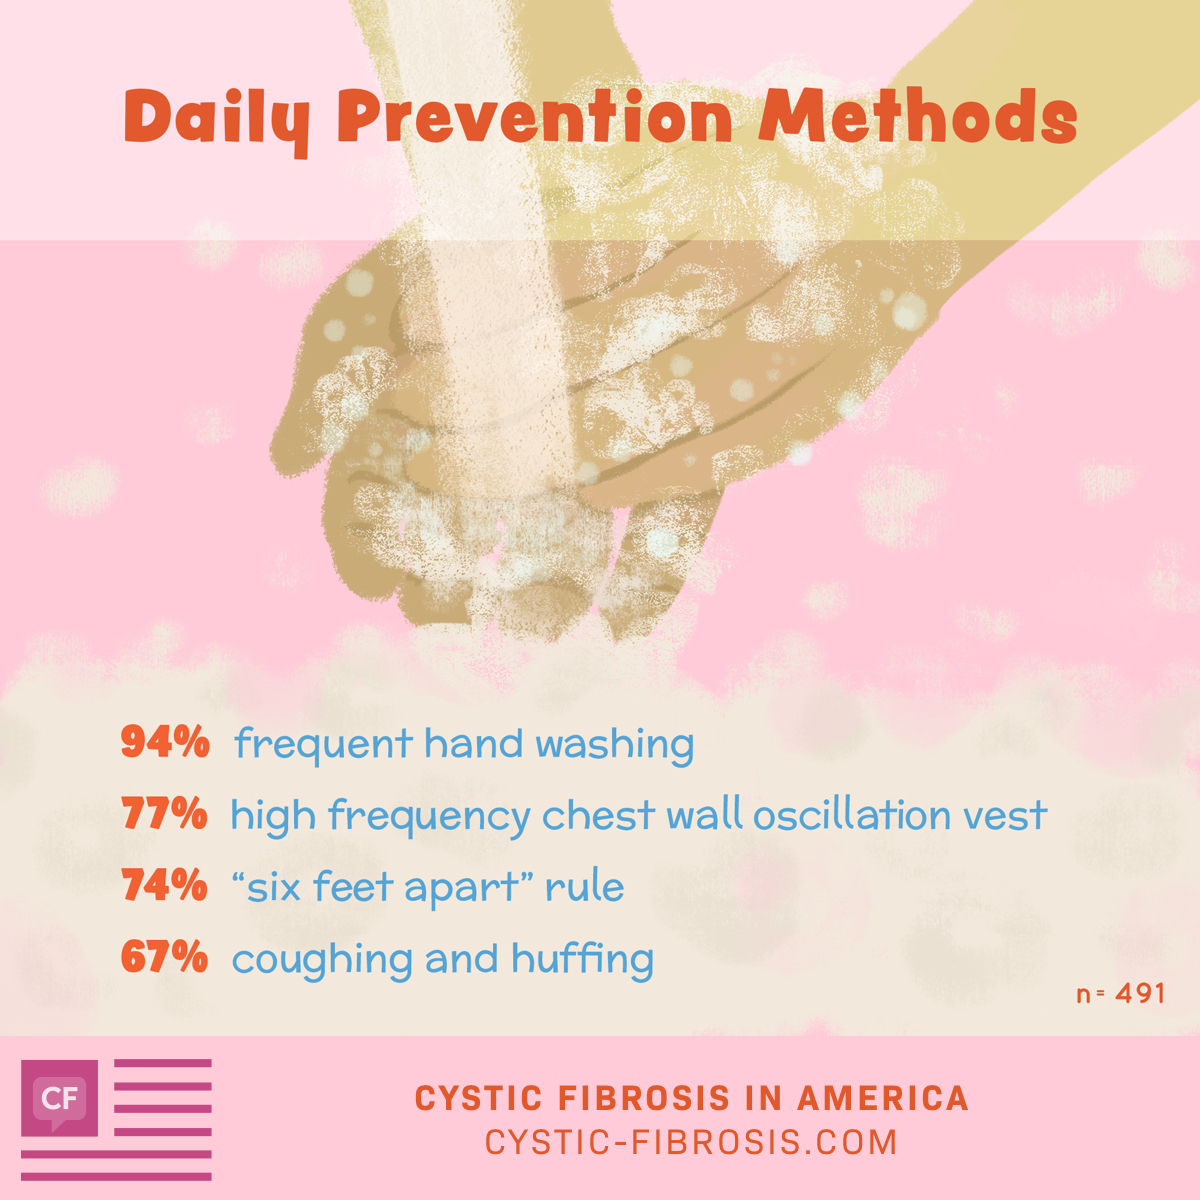 Daily prevention methods include frequent hand washing (94%), high frequency chest wall oscillation vest (77%), “six feet apart” rule (74%), and coughing and huffing (67%)